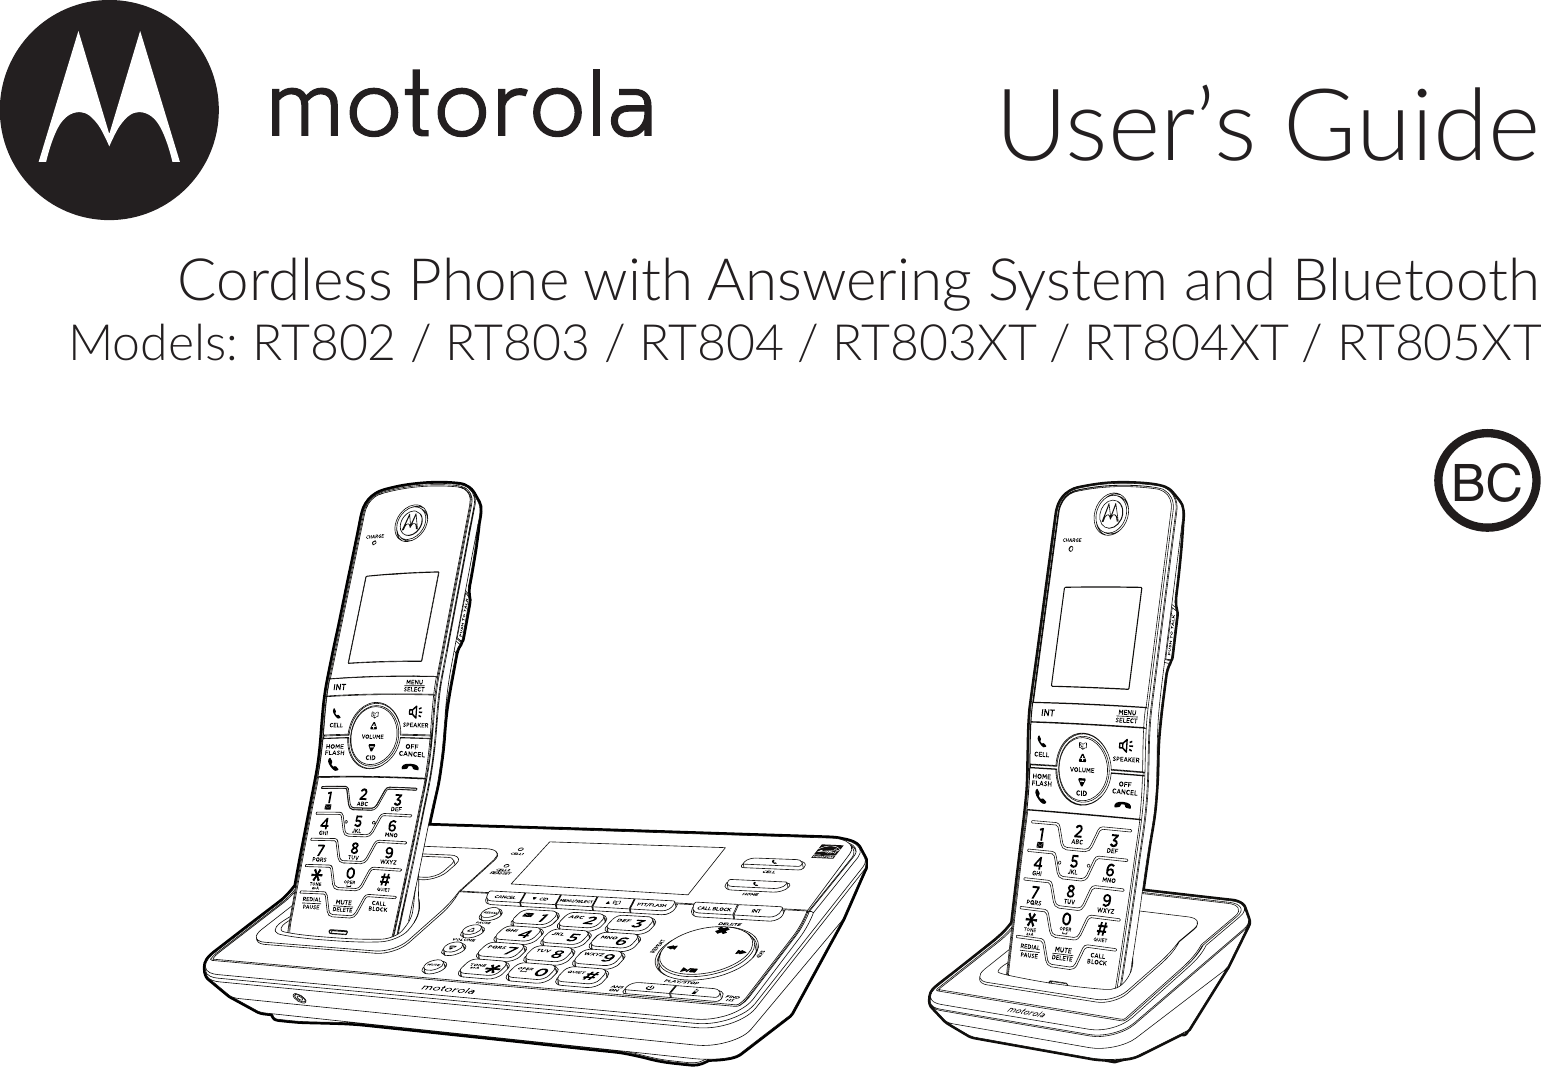 User’s GuideCordless Phone with Answering System and Bluetooth Models: RT802 / RT803 / RT804 / RT803XT / RT804XT / RT805XTBC